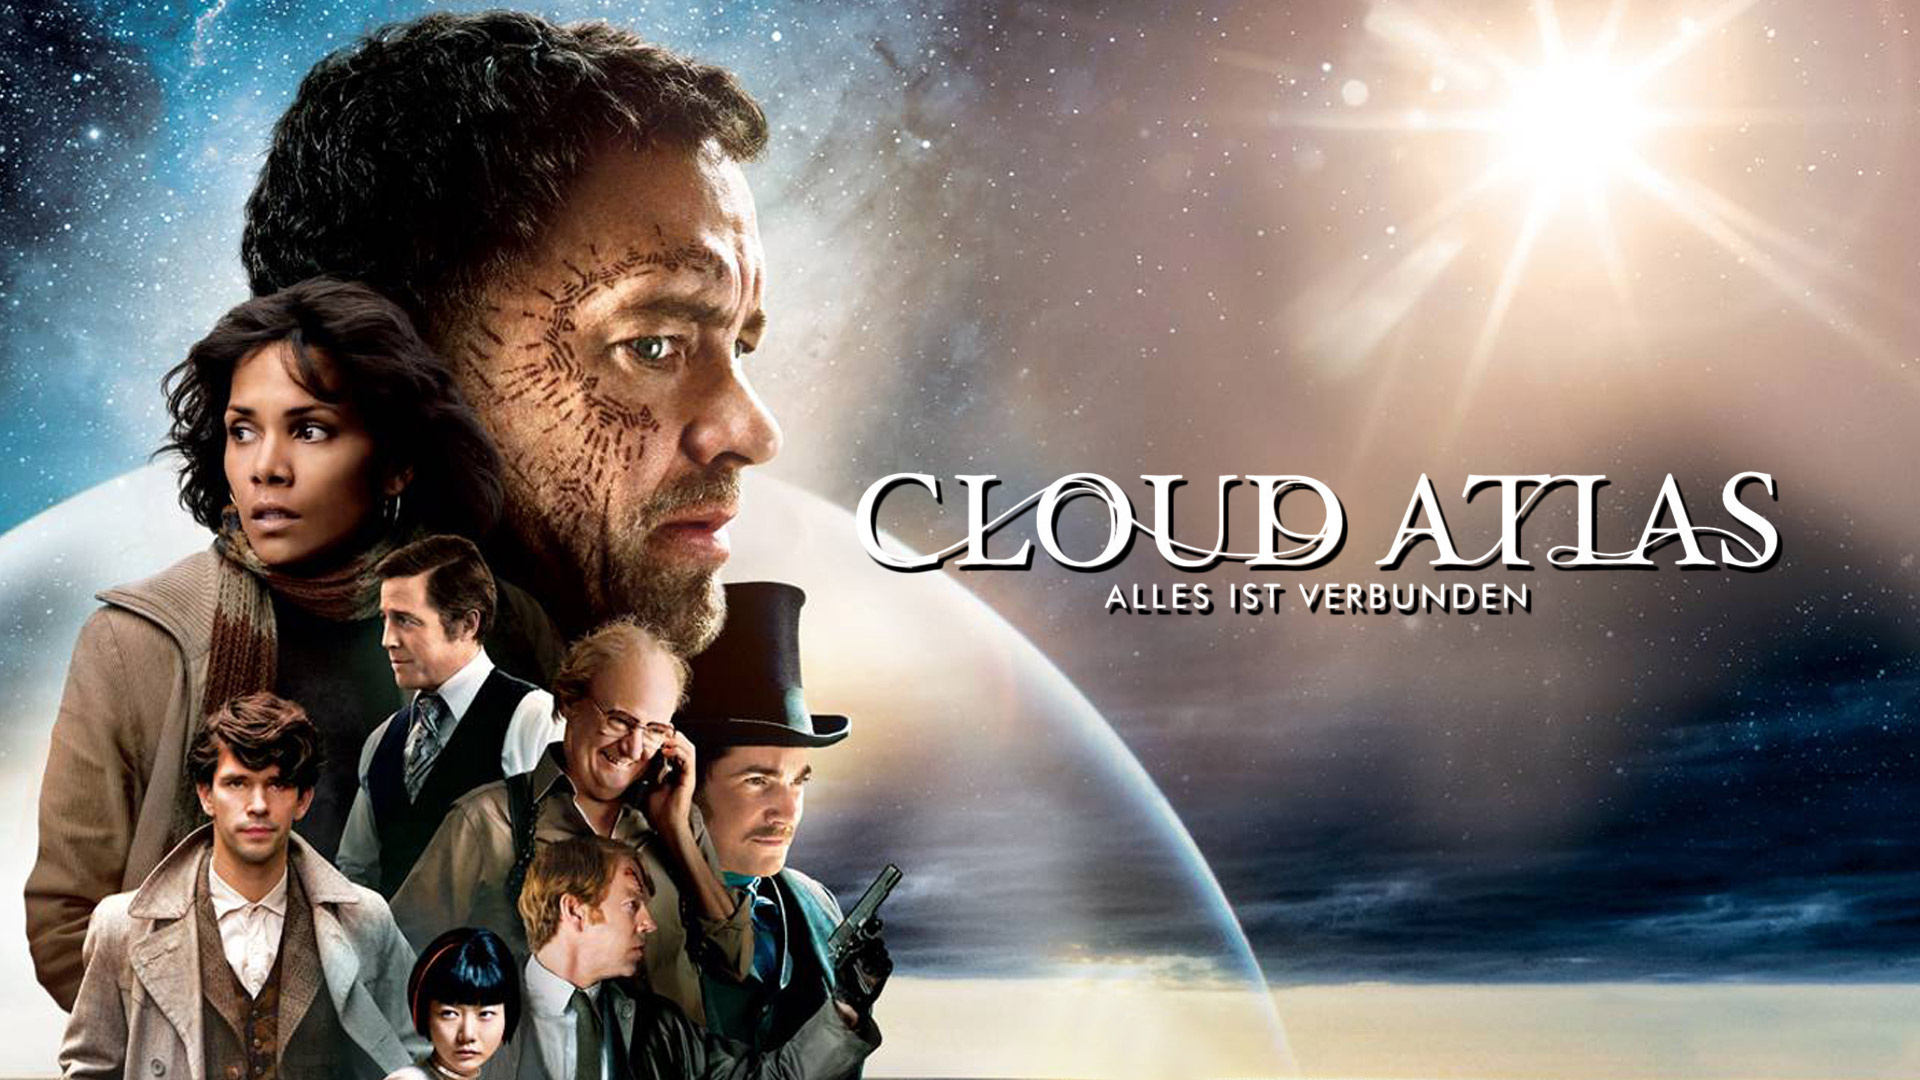 Cloud Atlas: The music for the film was orchestrated by Gene Pritsker. 1920x1080 Full HD Wallpaper.